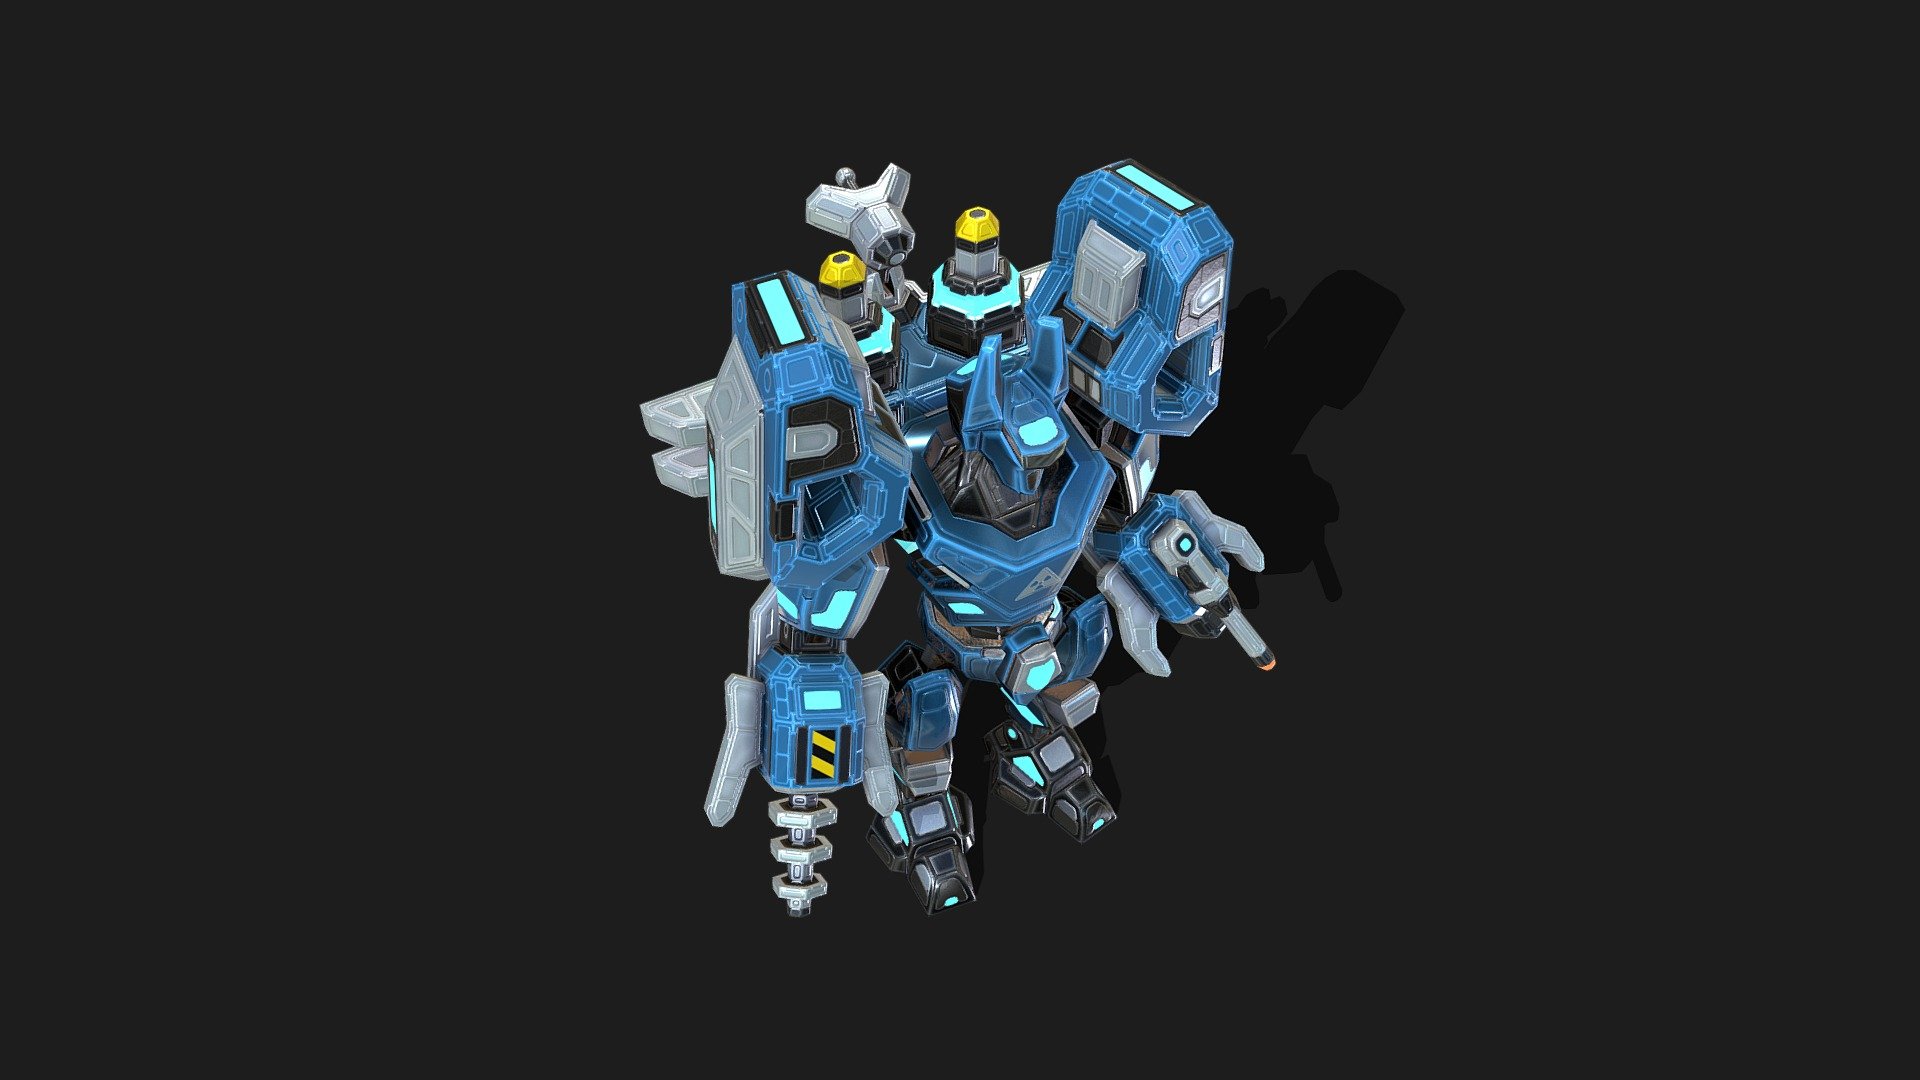 This unit was made for the xWar game project. The commander is the main unit of the player and it can be upgraded during the game. The Tier 2 is the first evolution of the commander, it is the same model but with a new and safer backpack, that could provides more energy in addition to have a radar to allow a better sight, and also new and stronger arms with a longer weapon and building tool.

Here is the first commander to compare the changes: https://skfb.ly/6sMx8 - xWar: Phy Commander Tier 2 - 3D model by Miguel Beckers (@miguelbeckers) 3d model